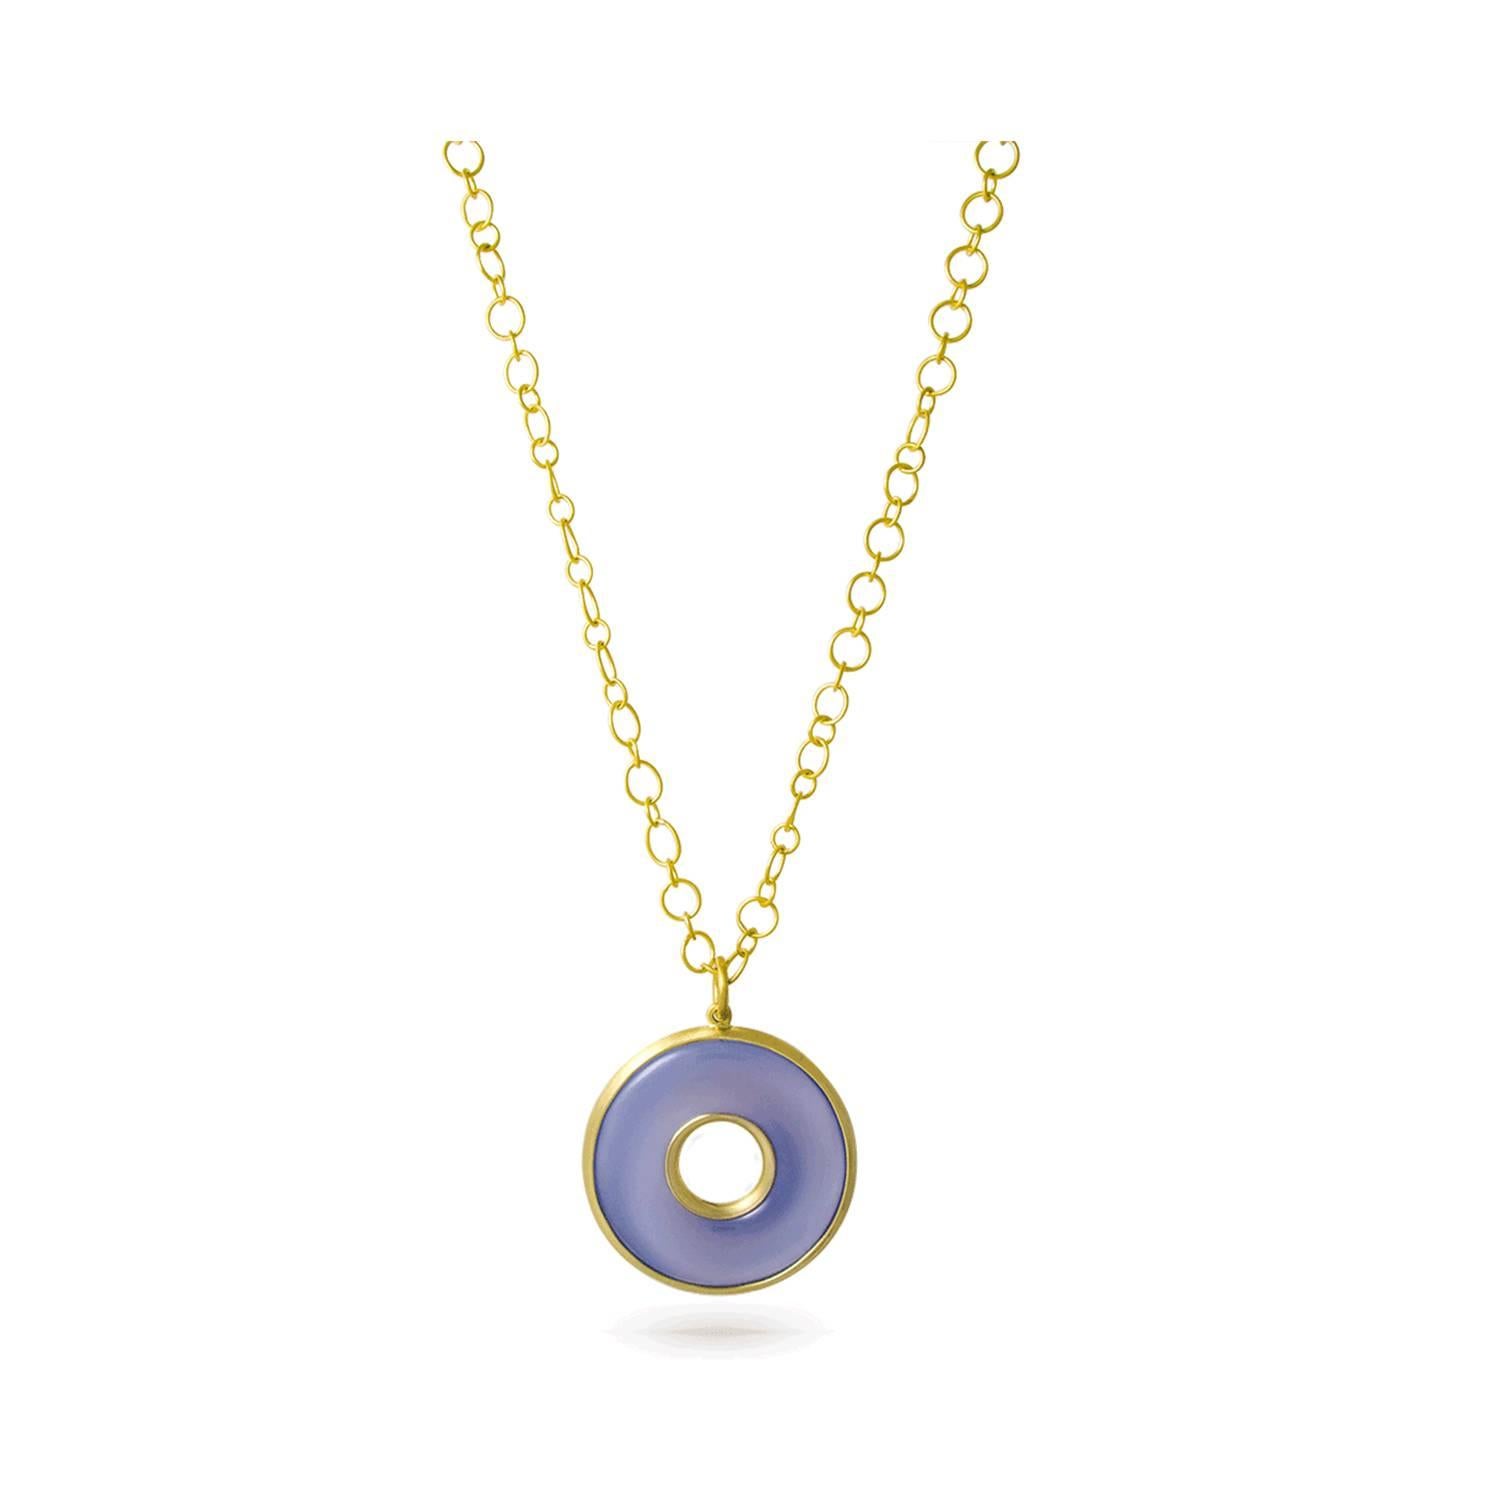 Circle of Life pendant in a soft shade of blue-gray chalcedony is hand-framed in 18k green* gold.   Blue Chalcedony, a member of the quartz family has a quality that is ethereal yet solid. It has an inviting, soft blue translucence, invoking calm